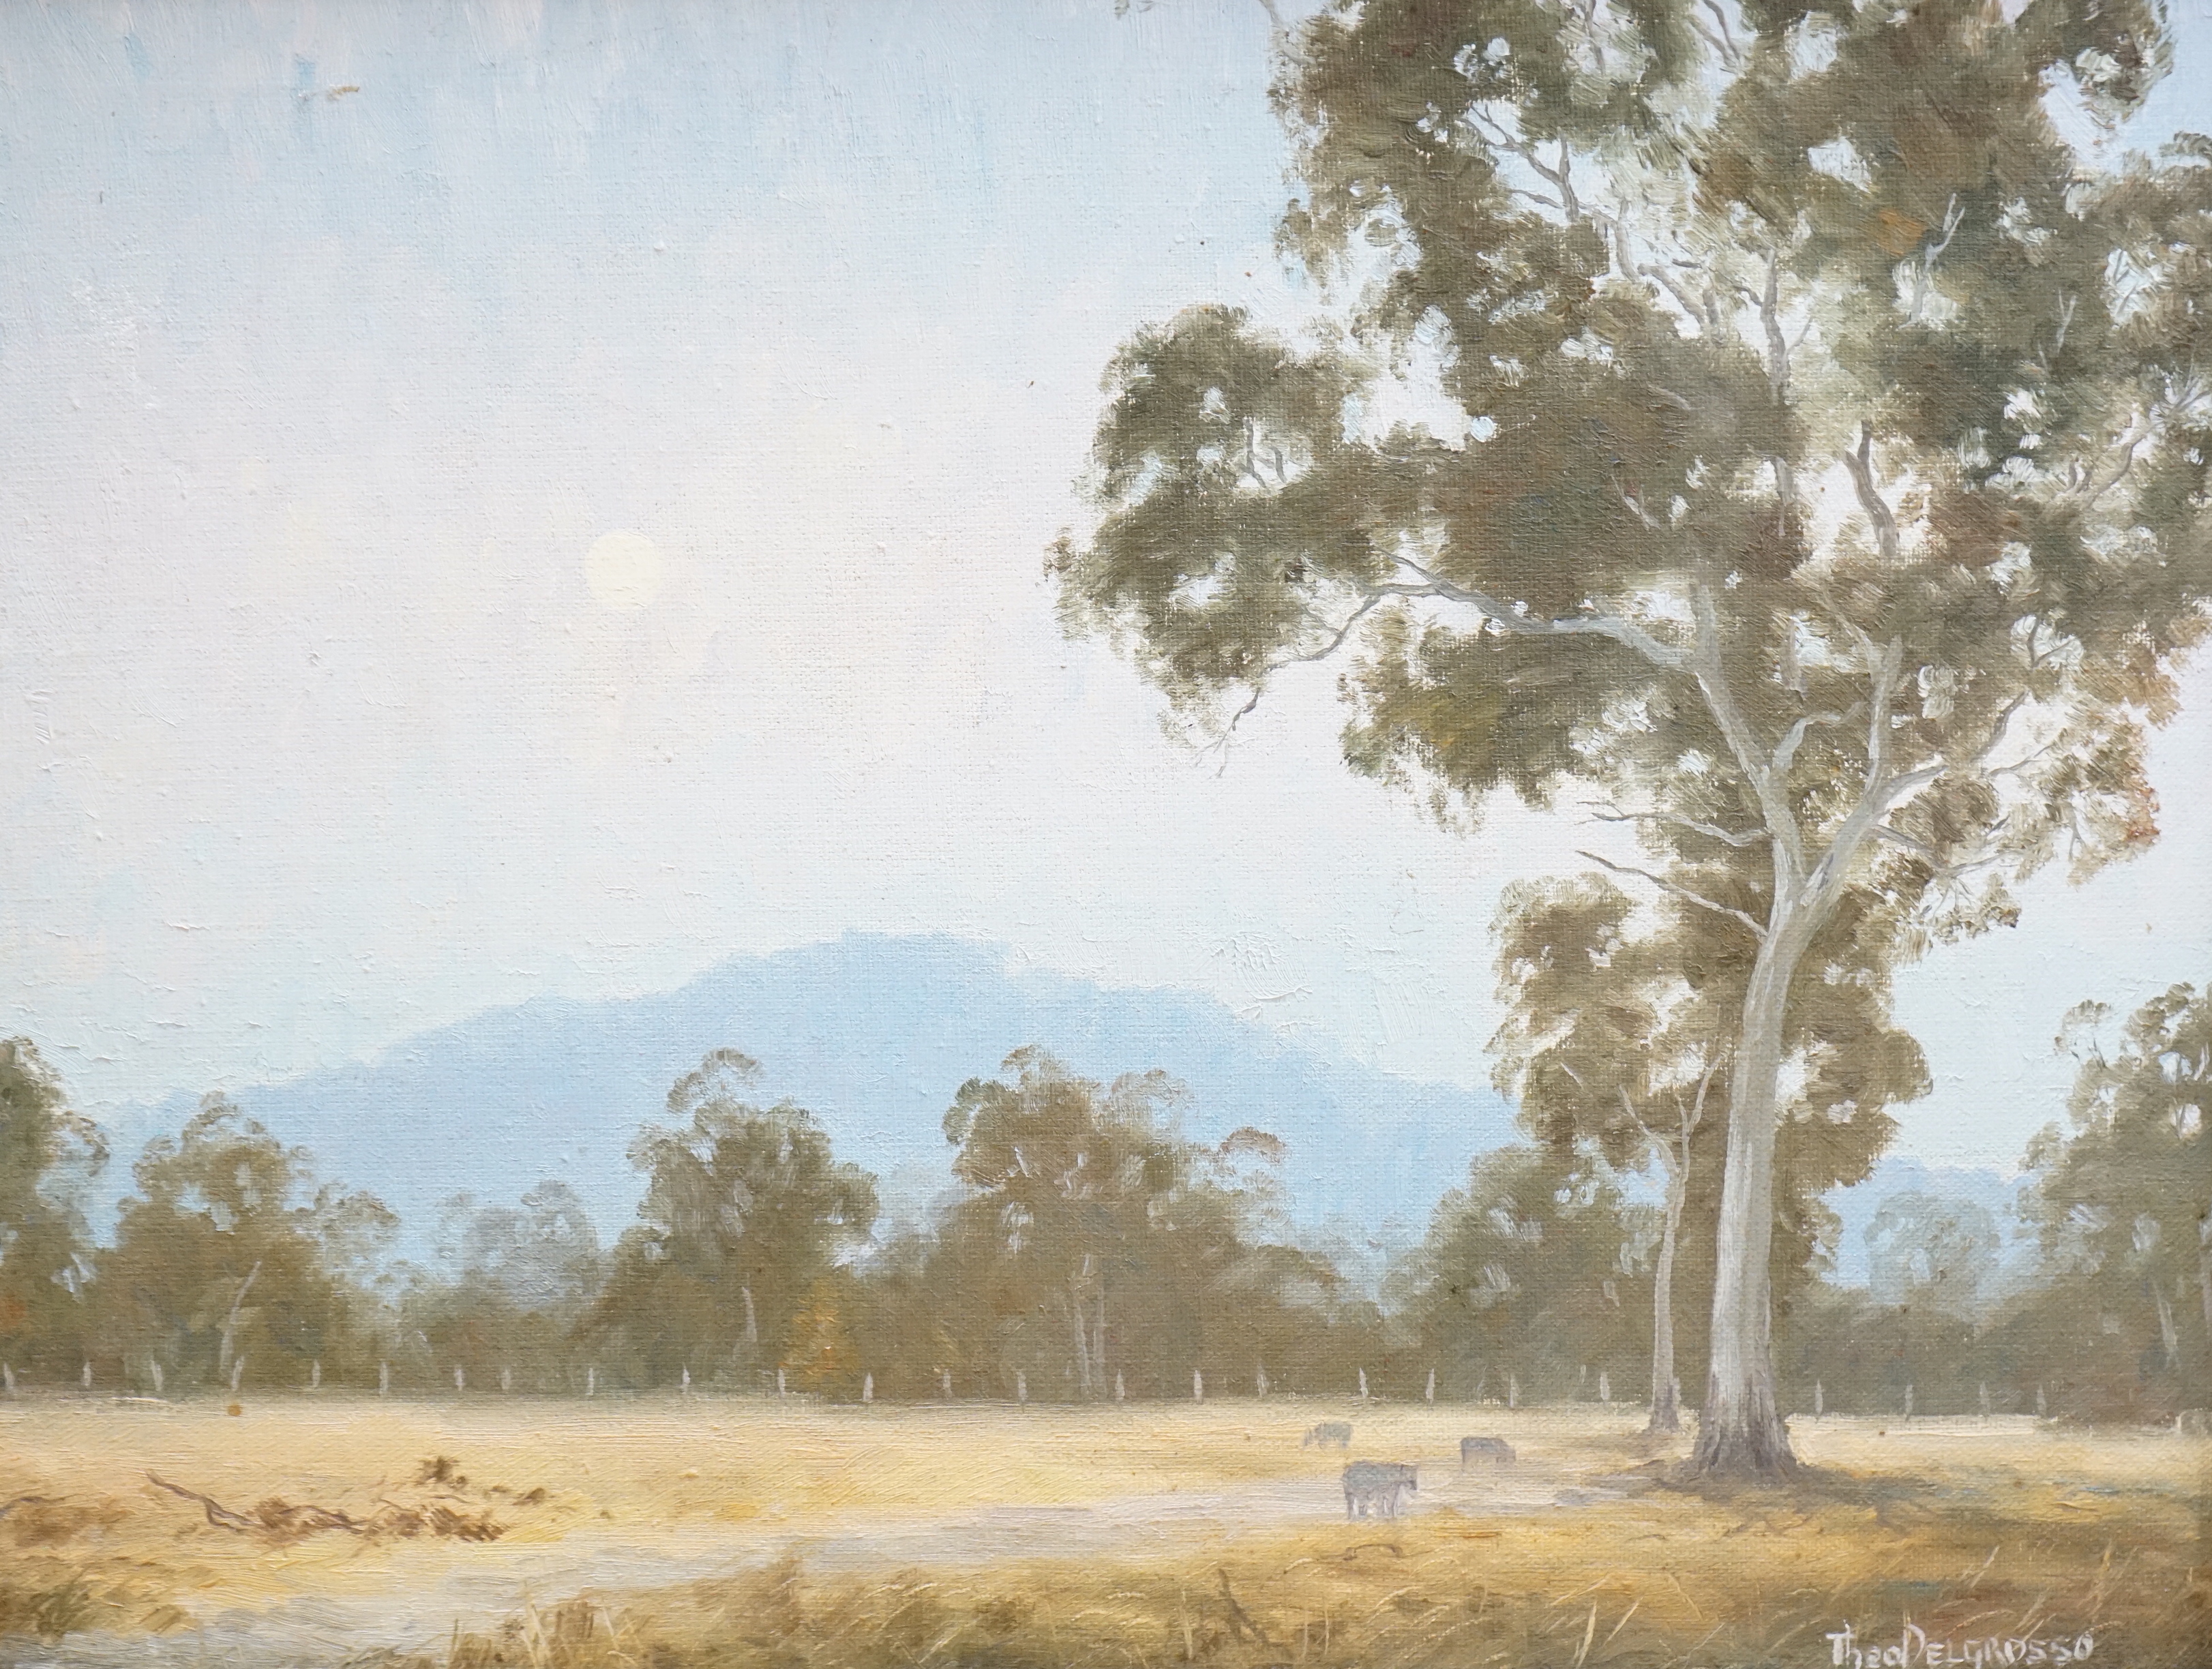 Theo Delgrosso (Australian, 1947-2011), oil on canvas, 'Moonrise over the You...', signed, 34 x 44cm